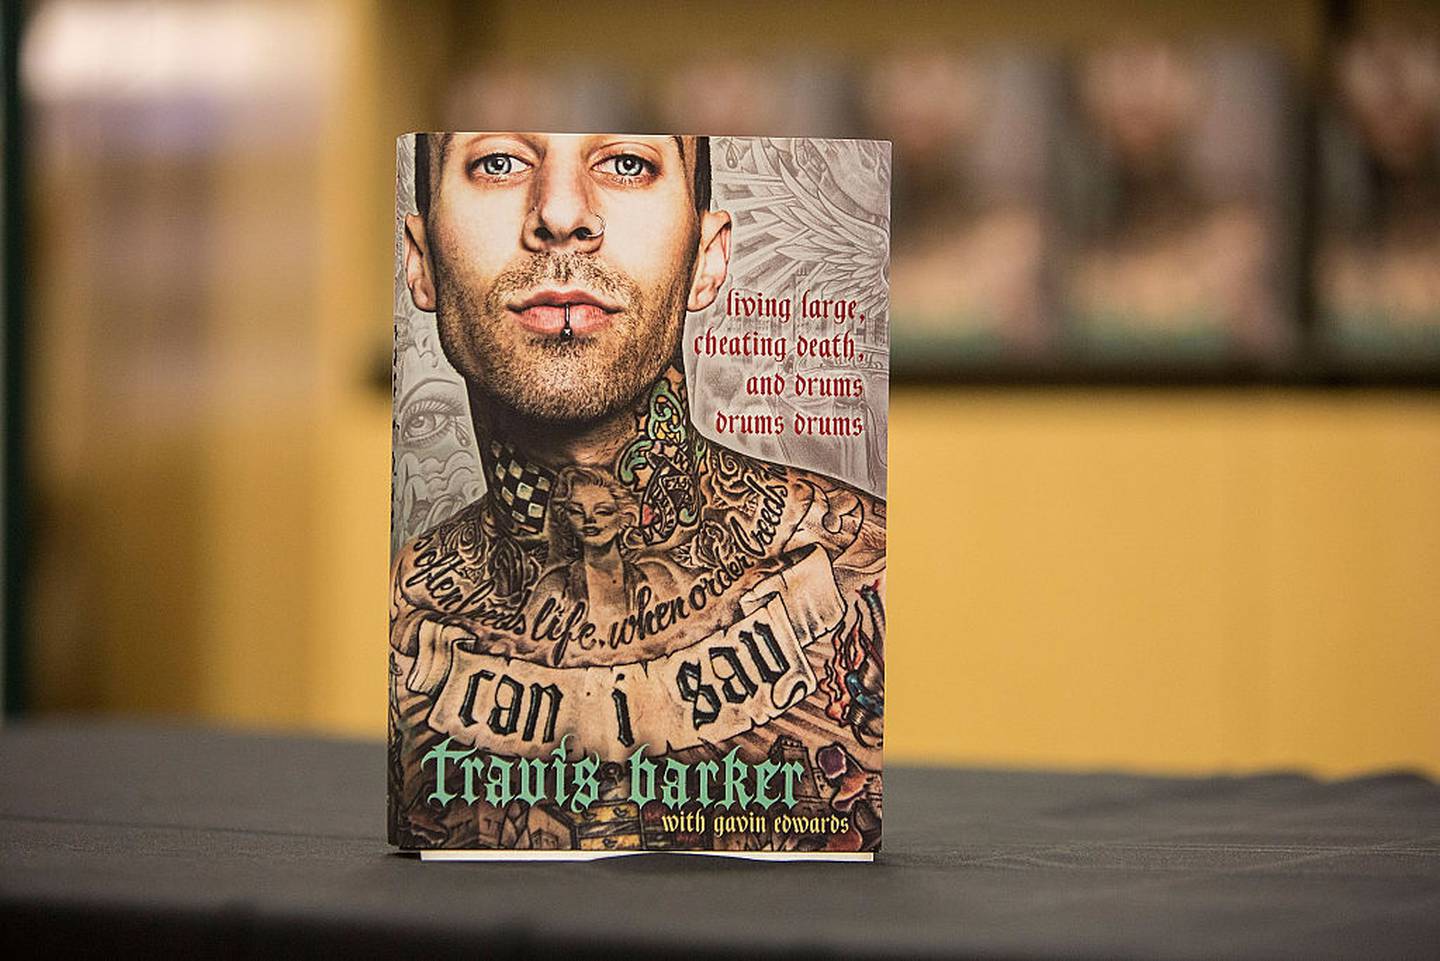 Travis Barker's 2015 book "Can I Say: Living Large, Cheating Death, And Drums, Drums, Drums" details time he spent with Kim Kardashian. Photo / Getty Images